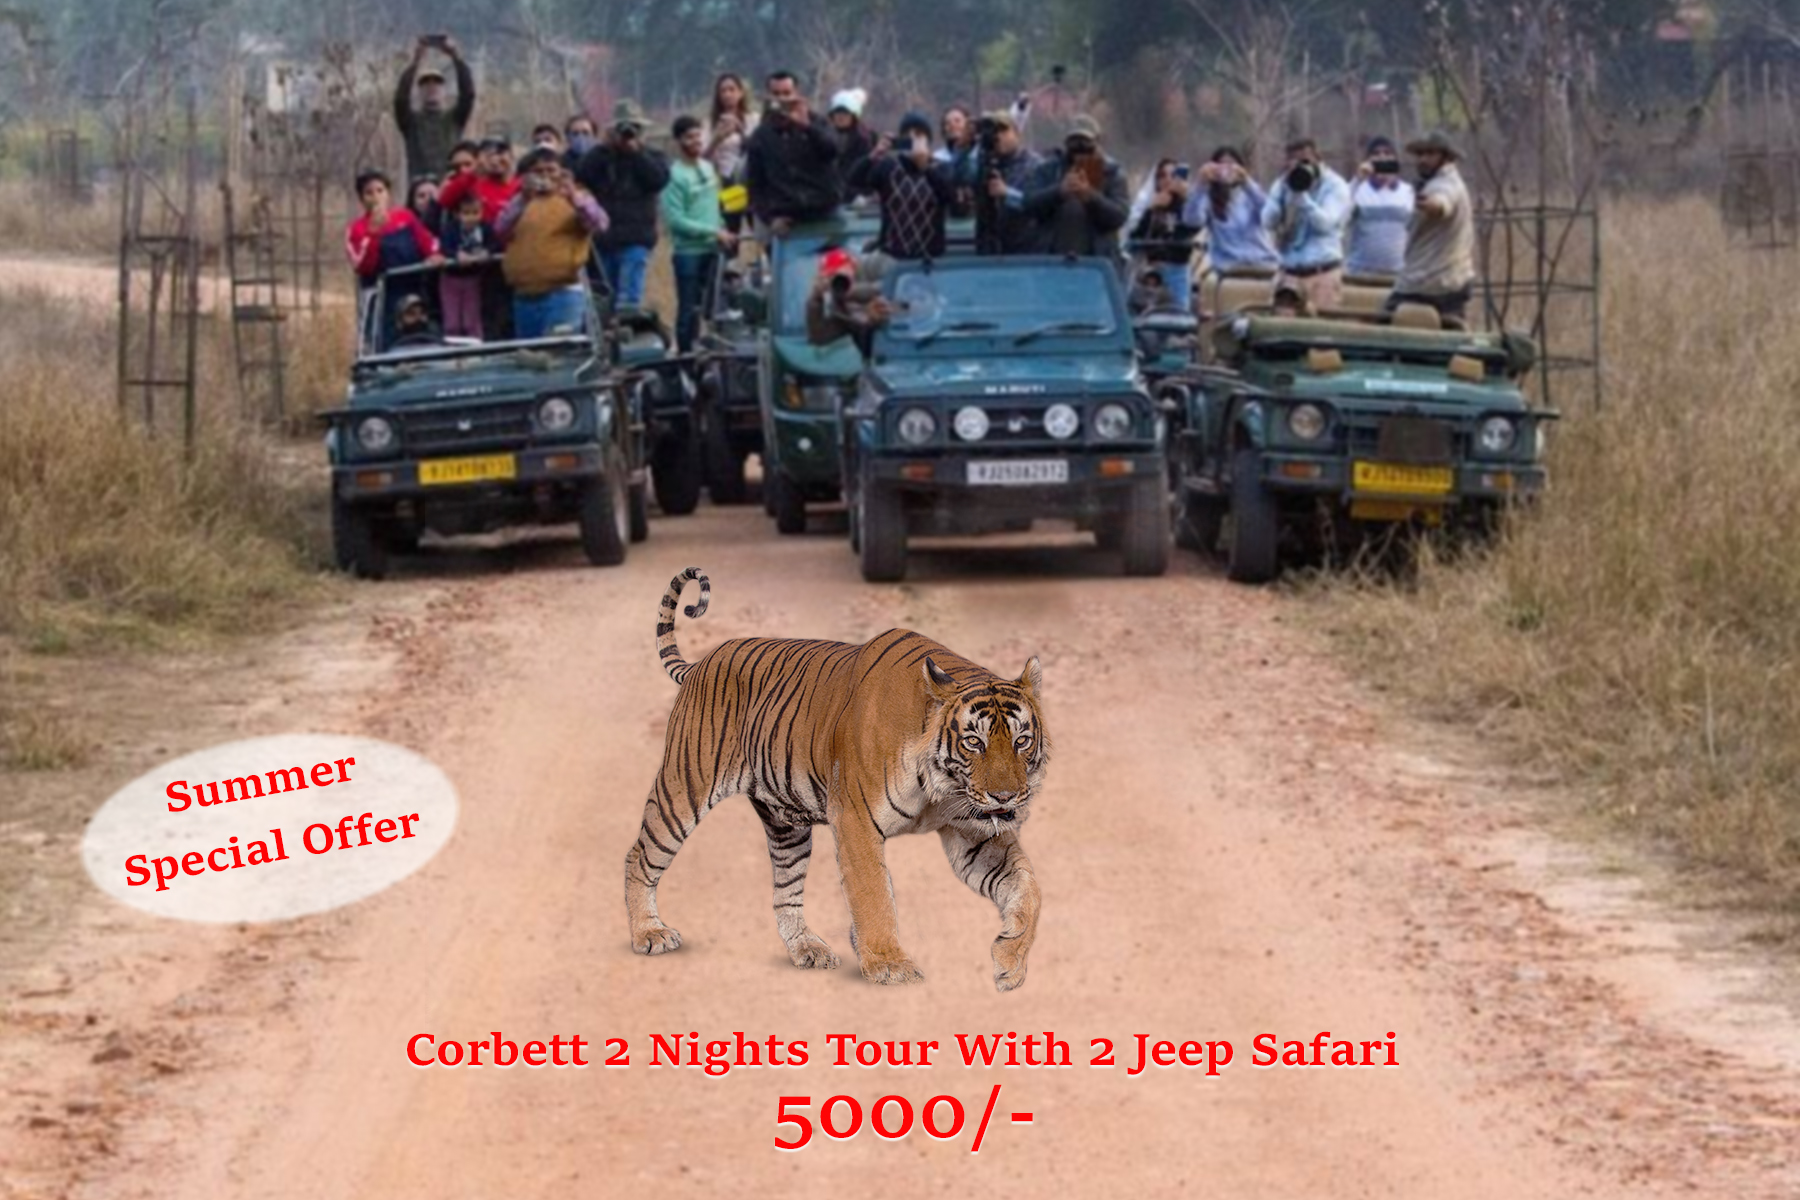 Summer Special Offer Corbett 2 Nights Tour With 2 Jeep Safari @5000 | Book NowTour and TravelsTour PackagesNorth DelhiKashmere Gate